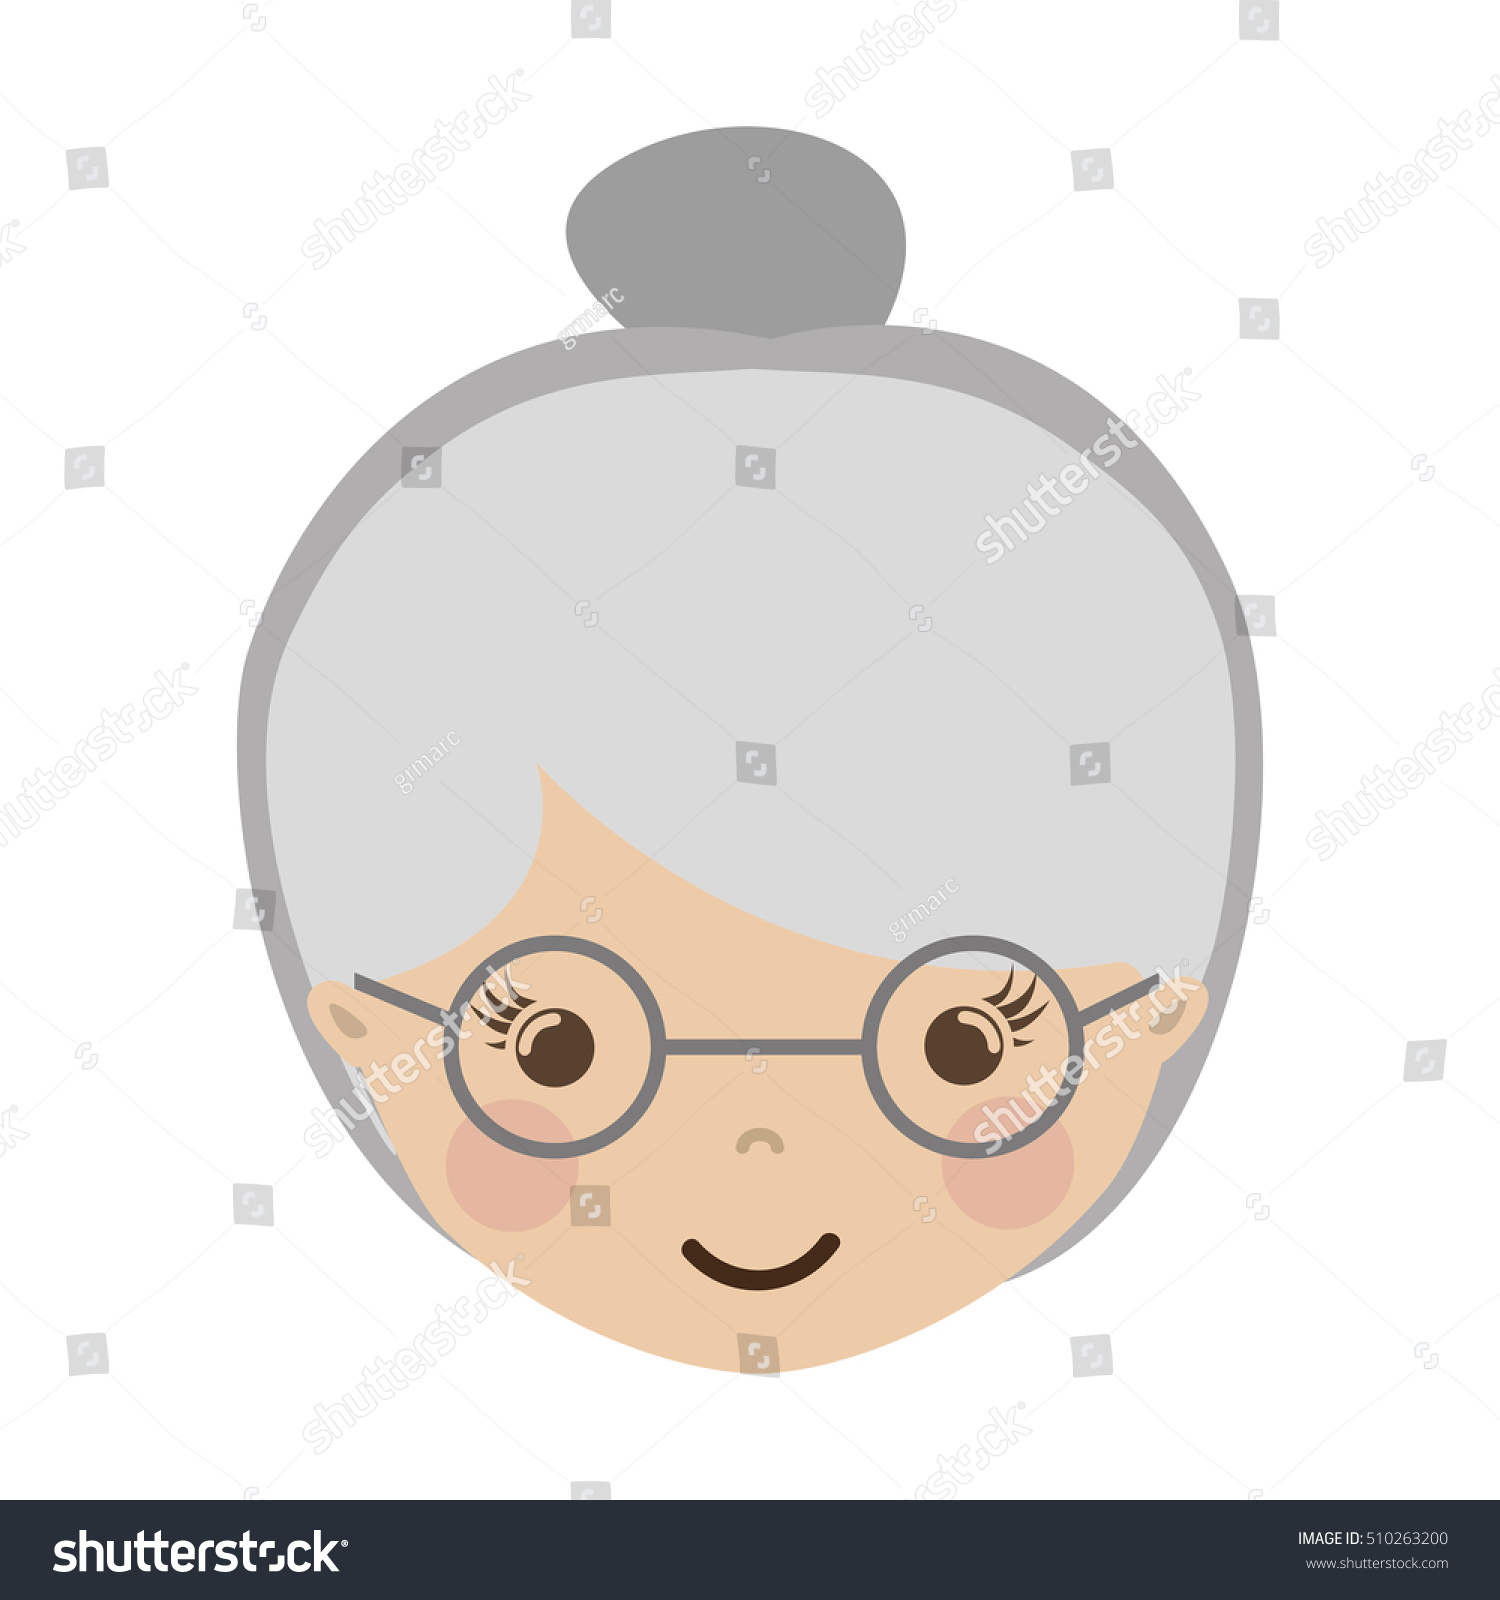 Old woman character avatar icon Royalty Free Vector Image